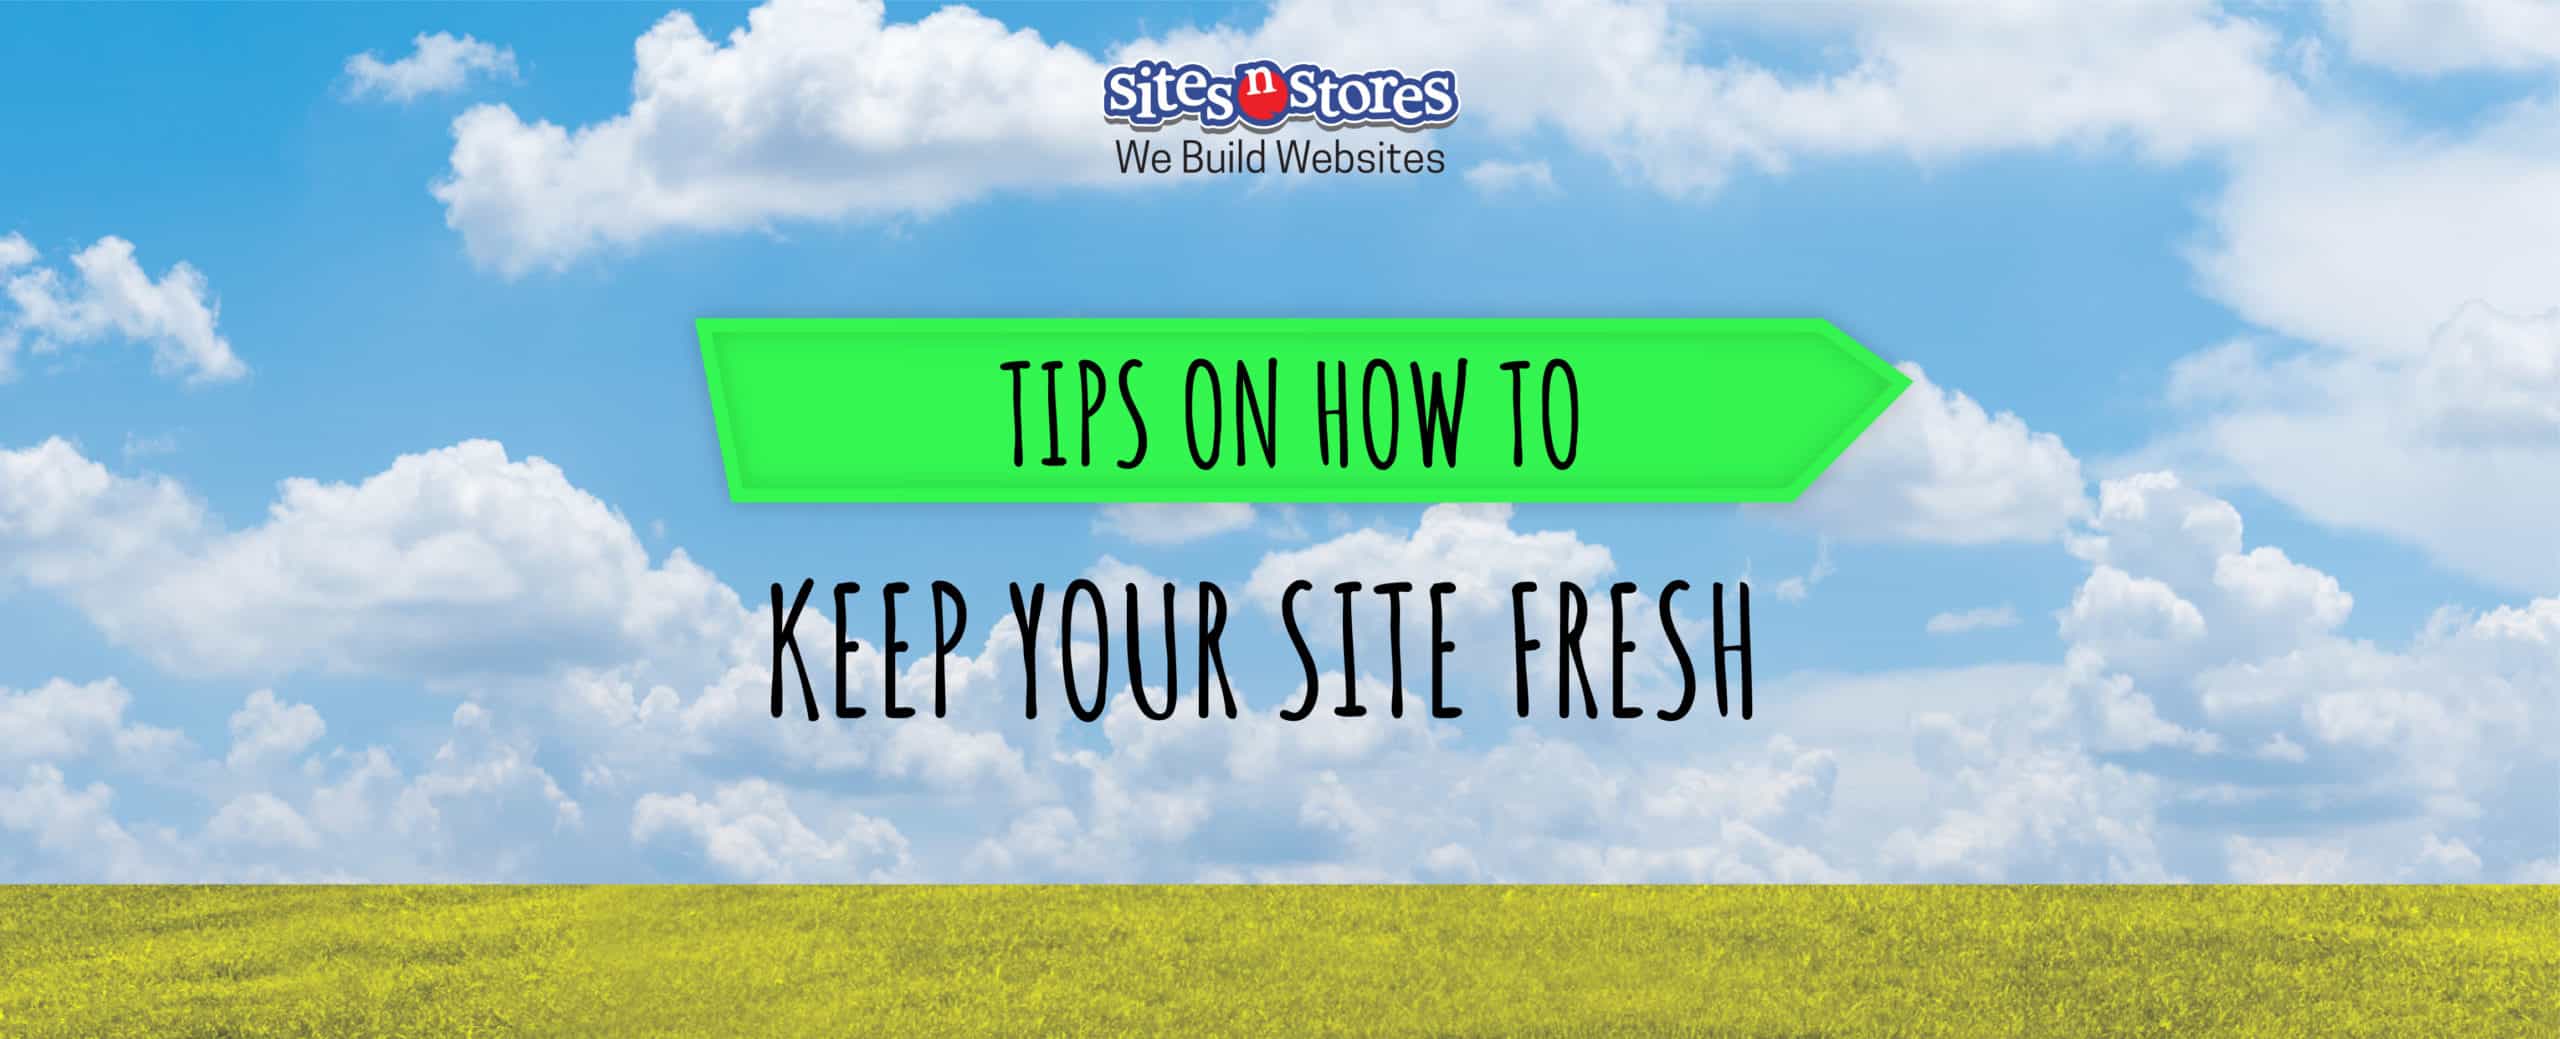 4 Tips on How to Keep Your Site Fresh